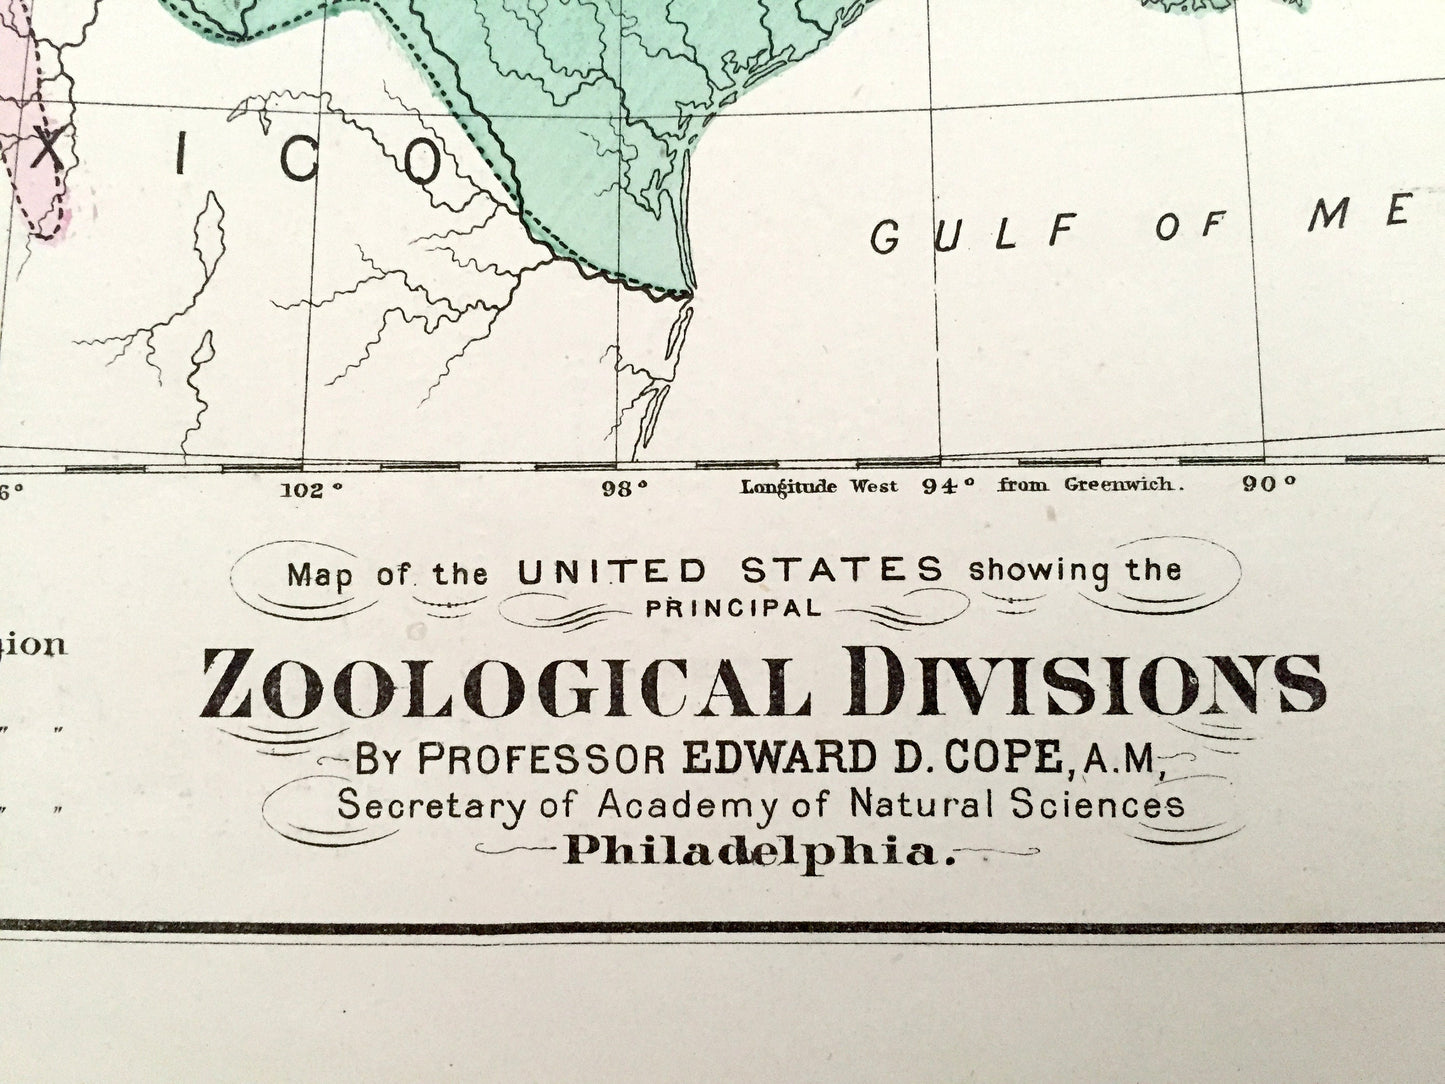 Antique 1874 Zoological Divisions Map of the USA from O.W. Gray's Atlas of United States of America; Stedman, Brown & Lyon – Edward D Cope